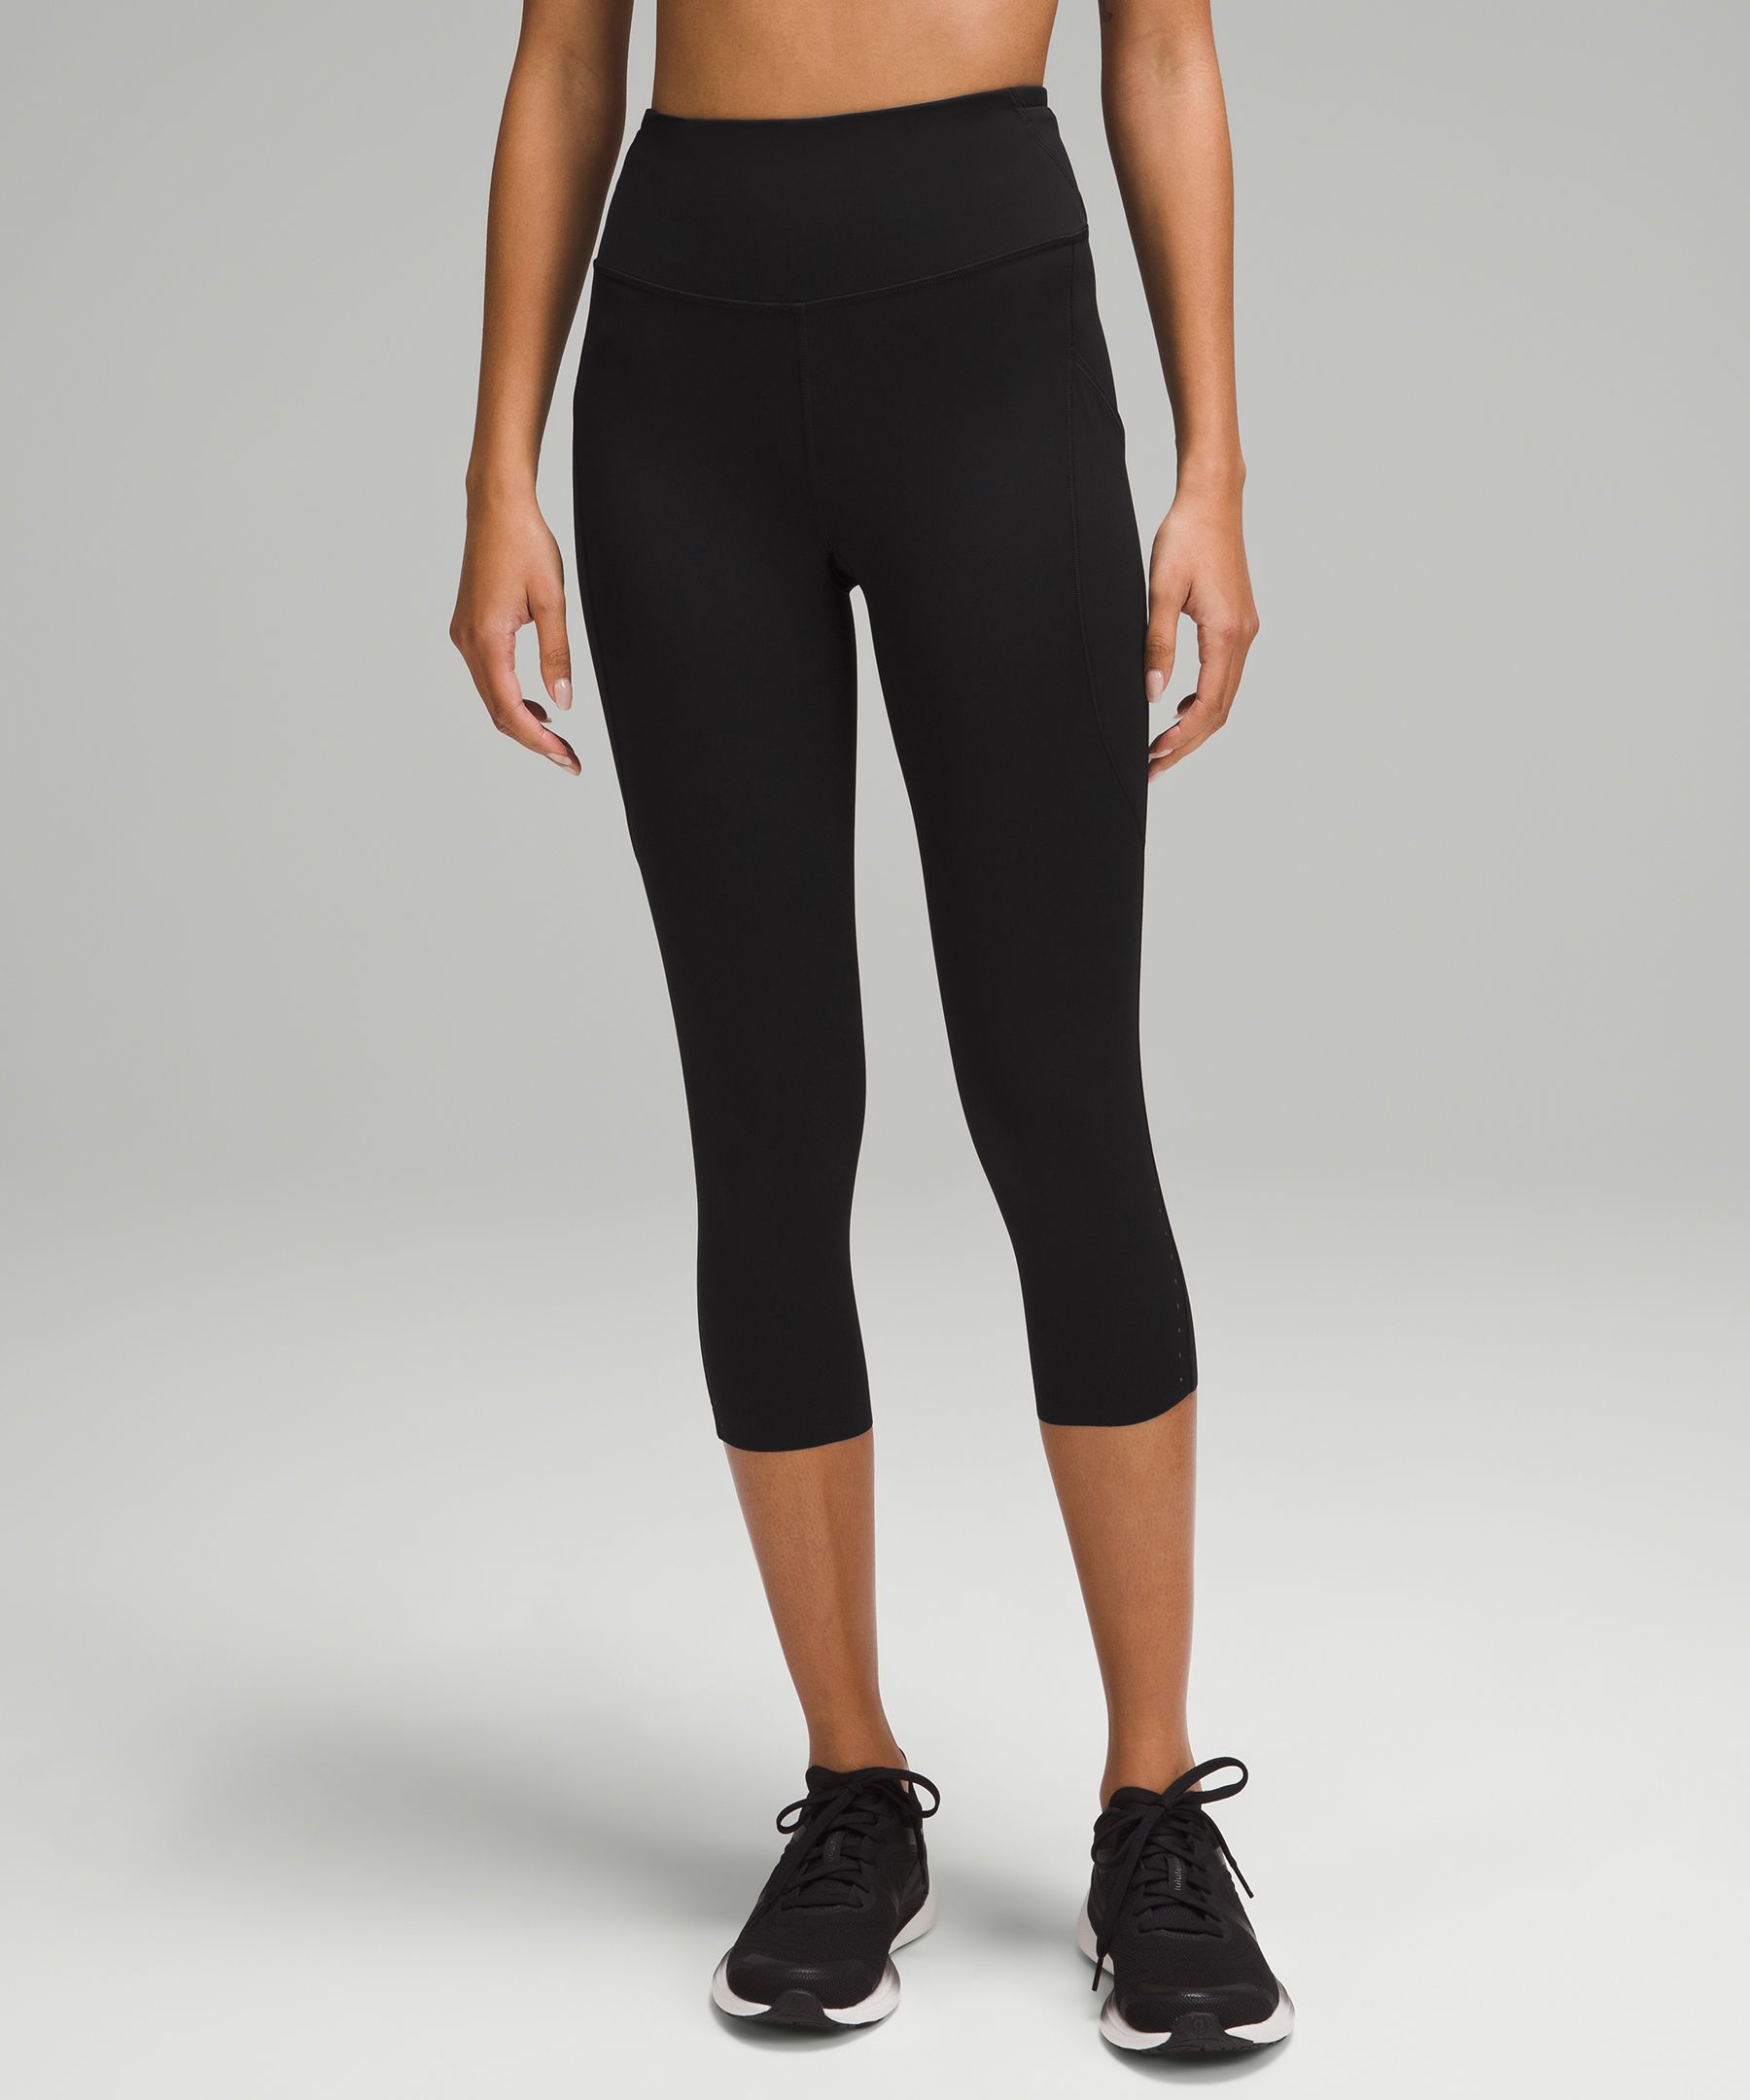 Fast and Free High-Rise Crop with Pockets 19" | Women's Capris